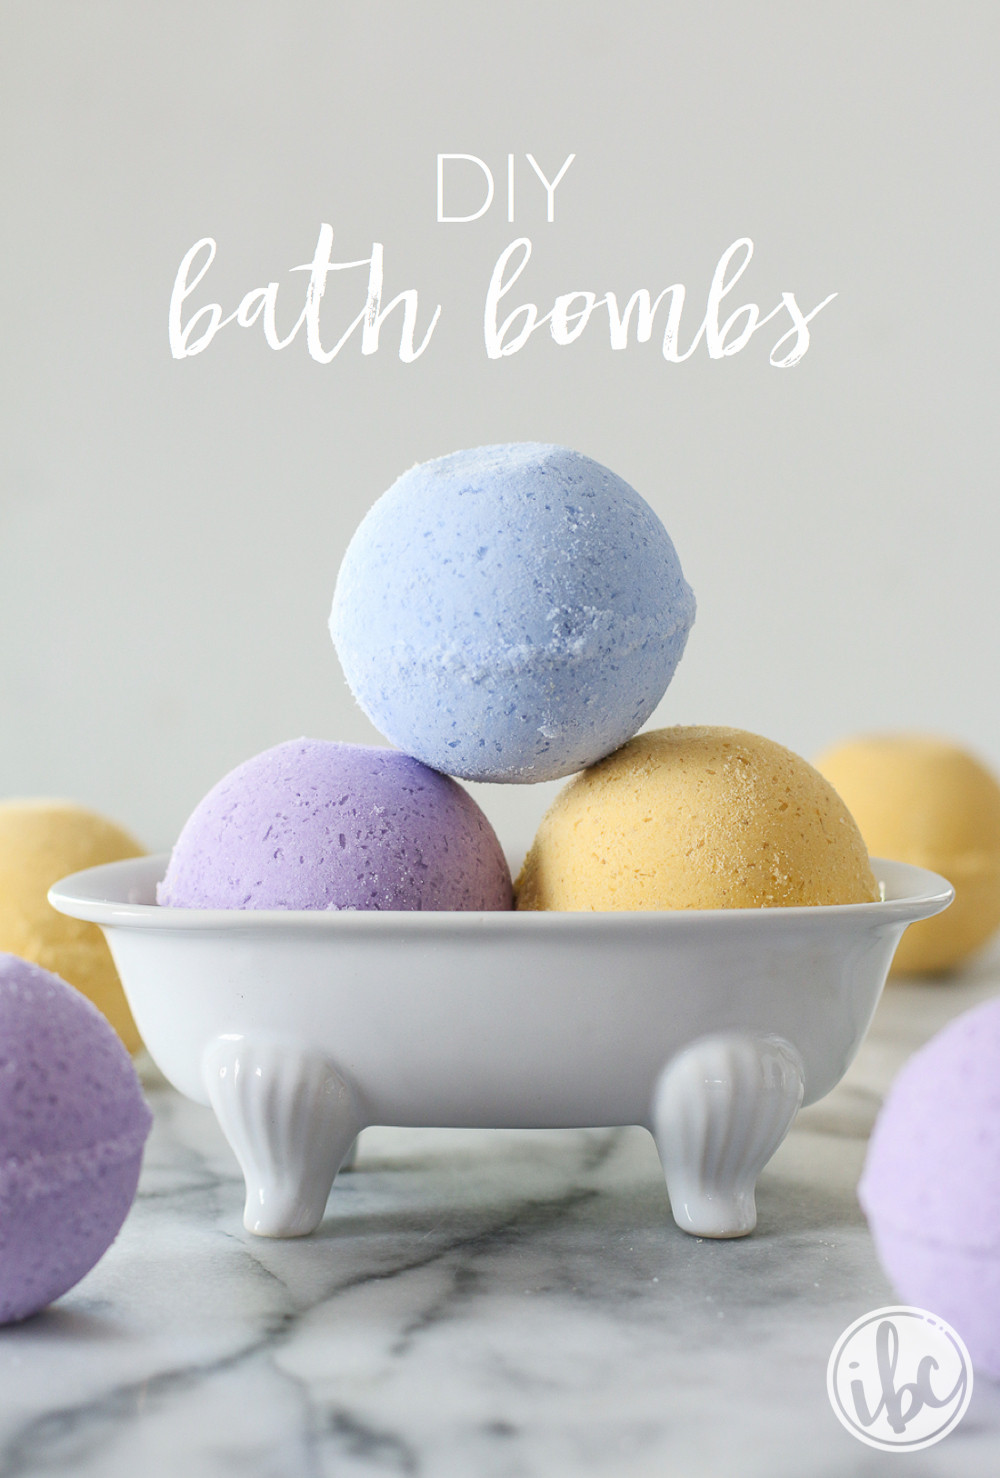 Best ideas about Bath Bomb DIY
. Save or Pin DIY Bath Bombs Inspired by Charm Now.